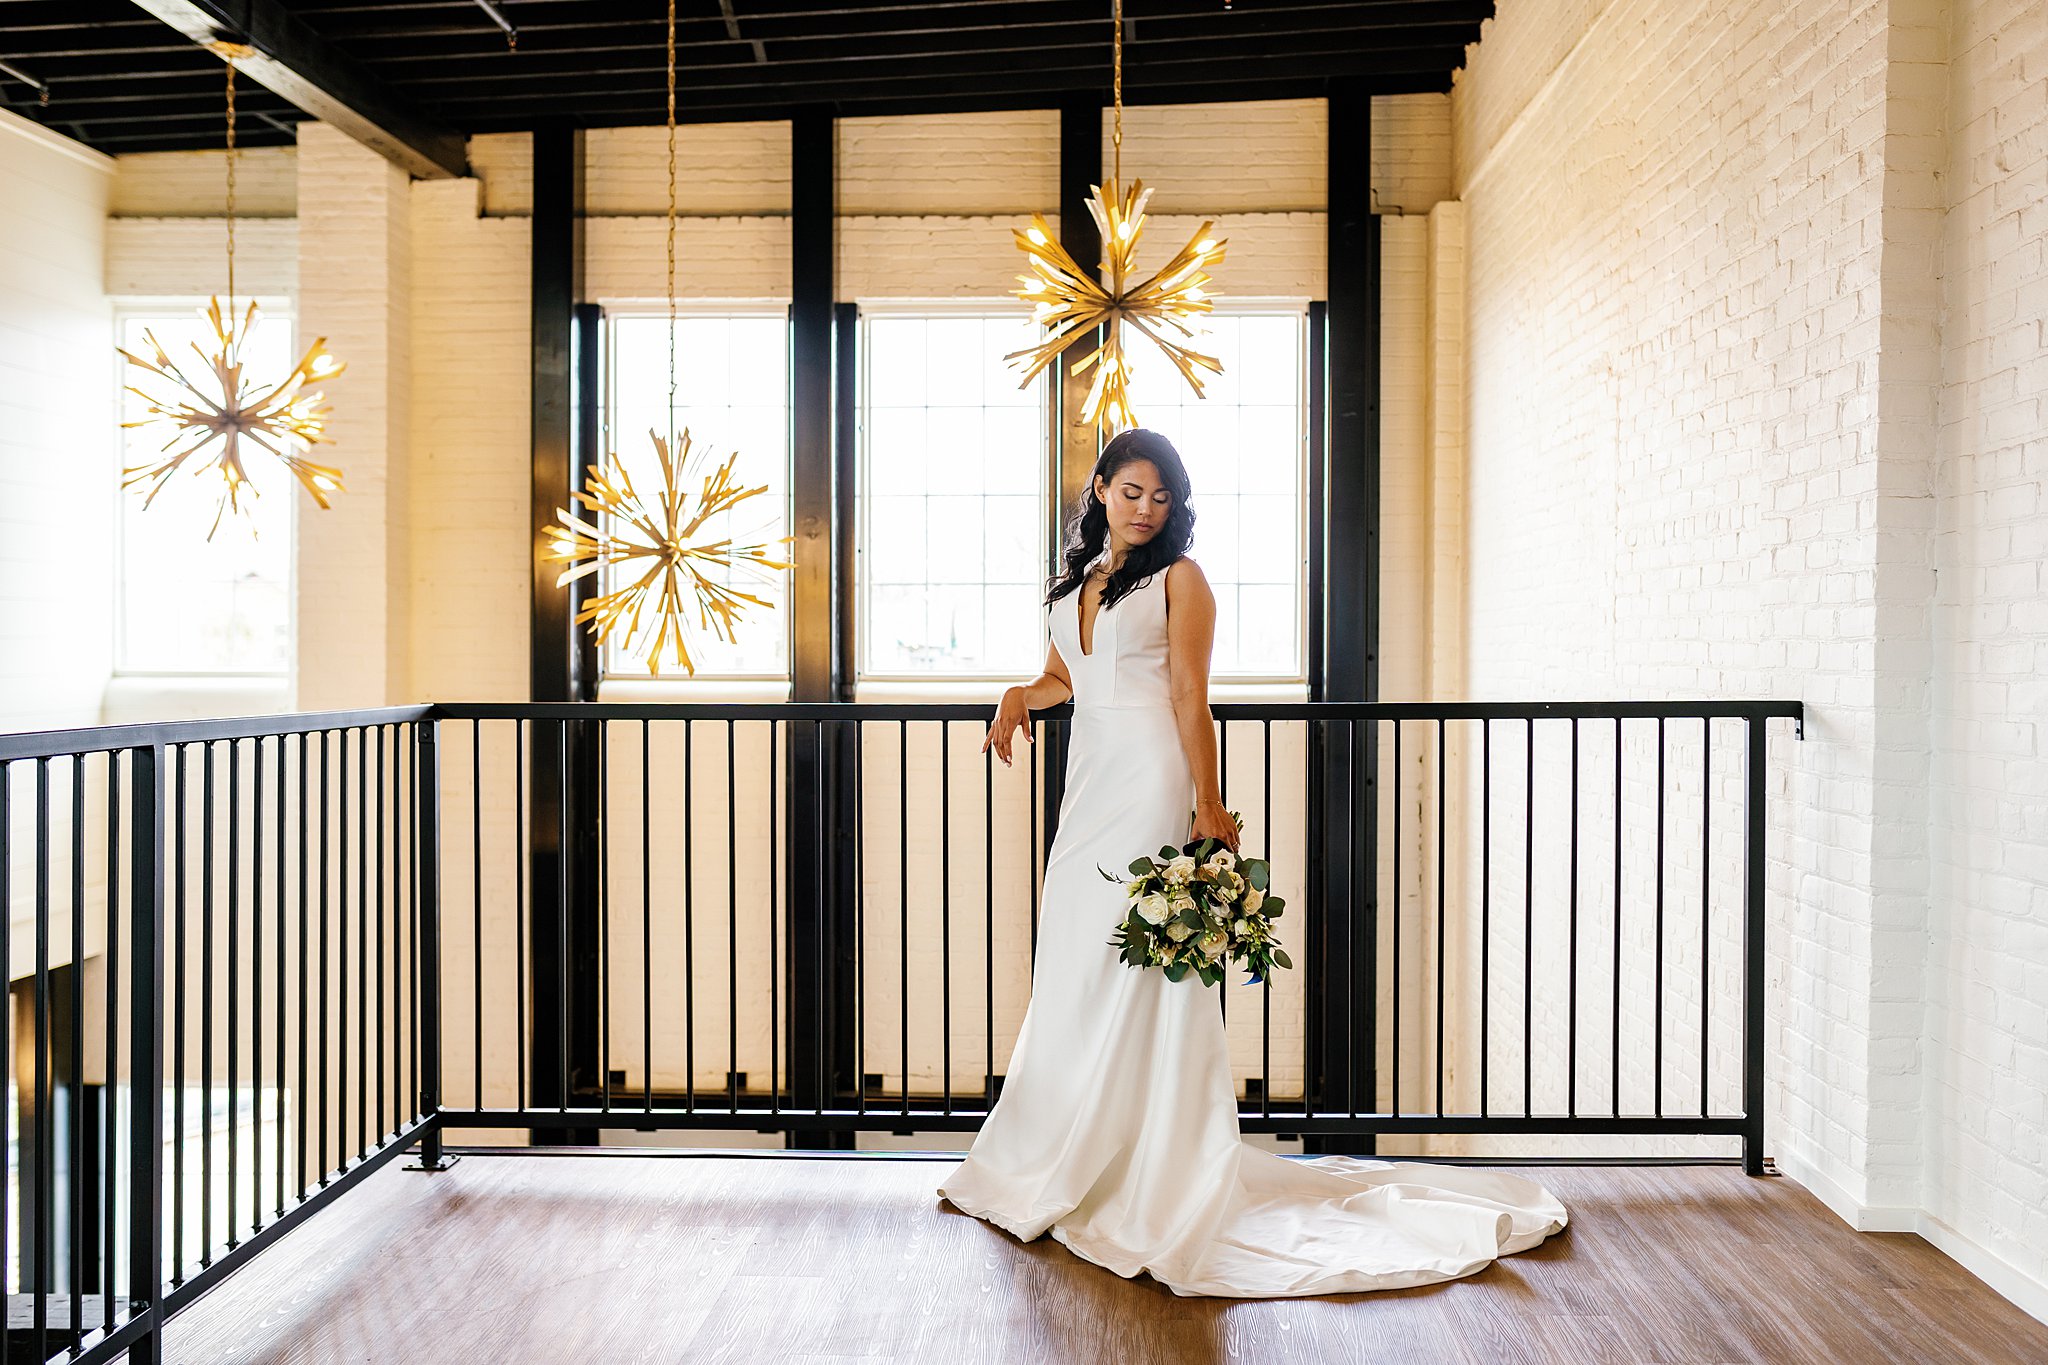 Bride stands in her dress on an indoor balcony in front of large windows and modern chandeliers unique wedding venues dayton ohio